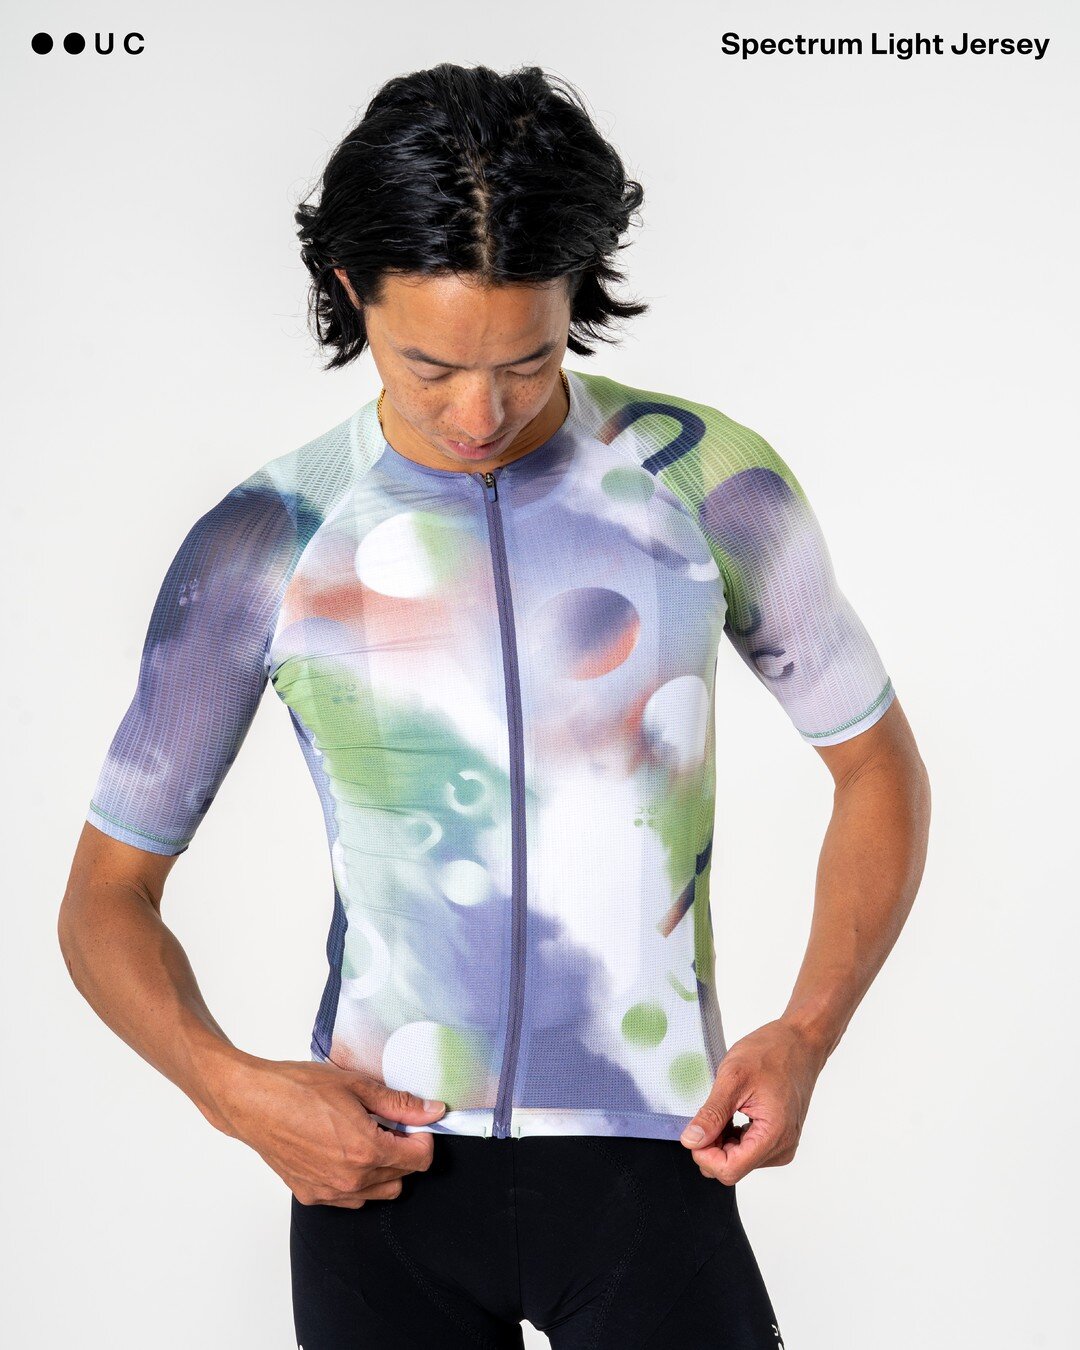 Best of Archive Sale: Spectrum Light Jersey.

Tailored to excel in hot conditions, this jersey's knitted structure provides enhanced airflow and breathability whilst ultrasonic welded seams provide a smooth finish to promote comfort and performance.
